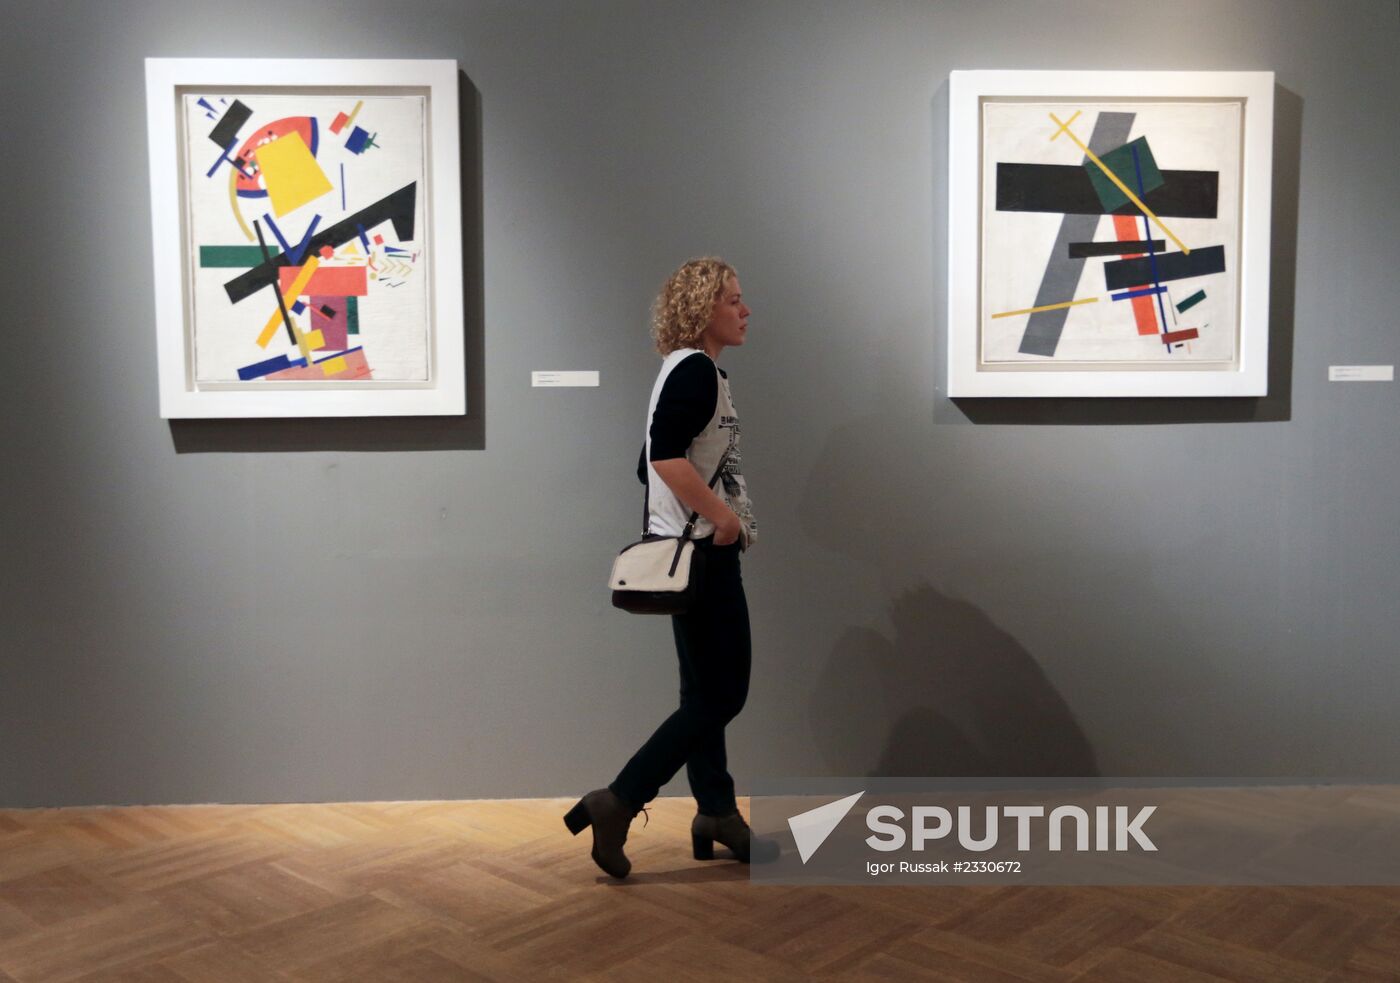 Exhibition "Kazimir Malevich. Before and after the Square"